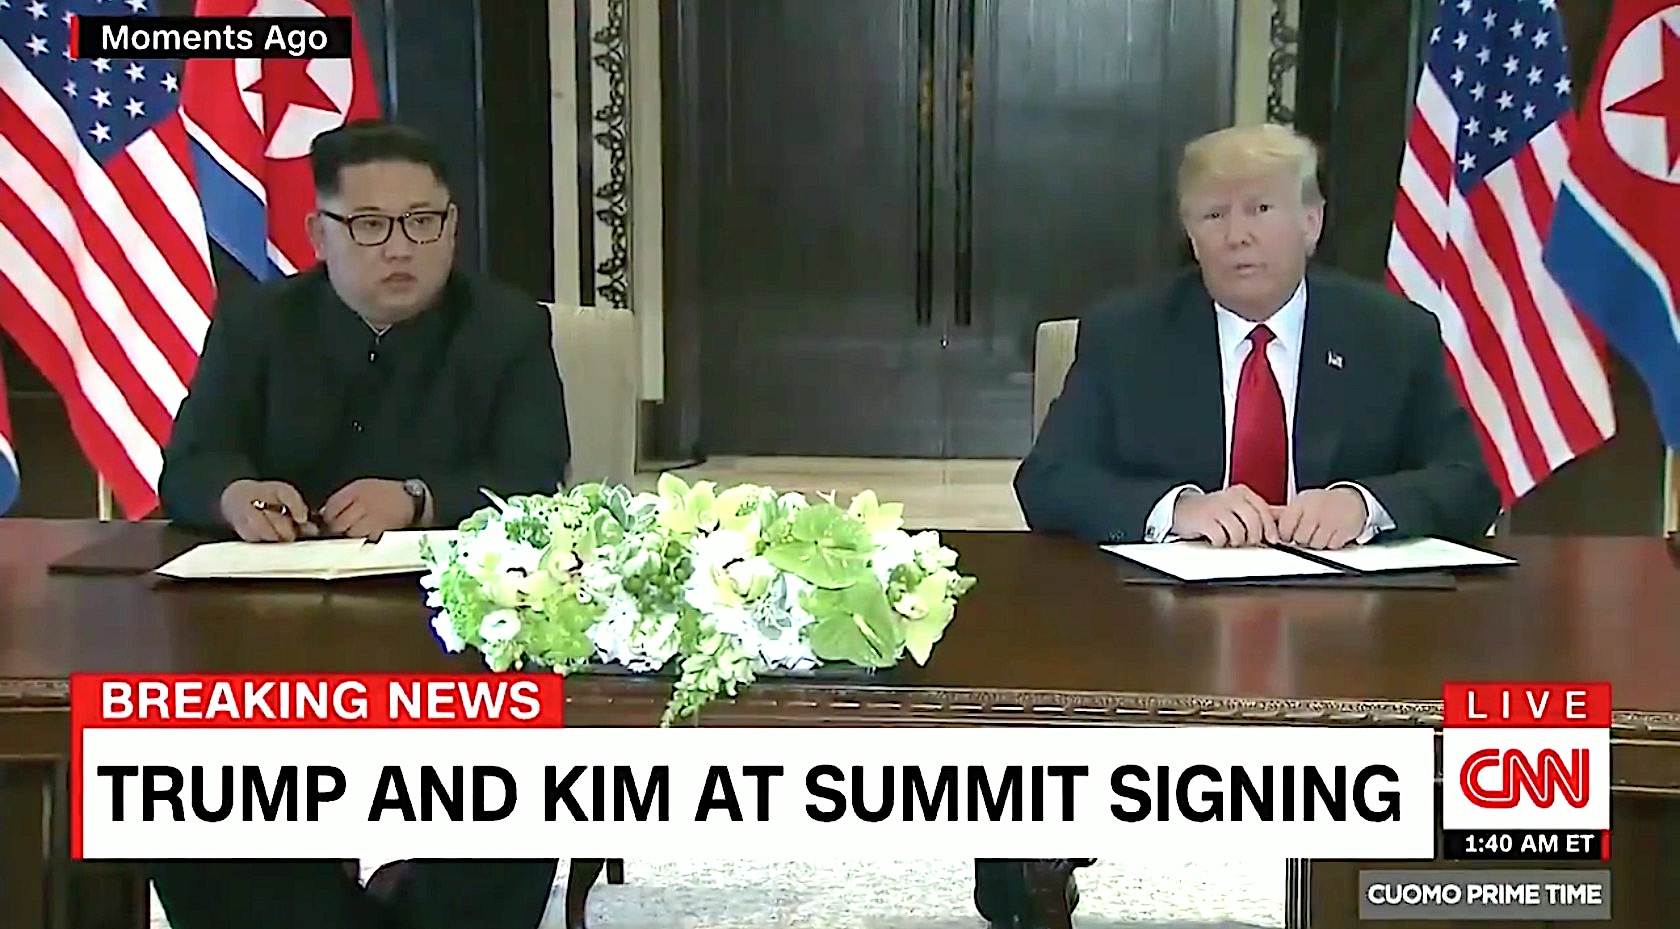 Trump and Kim sign some document